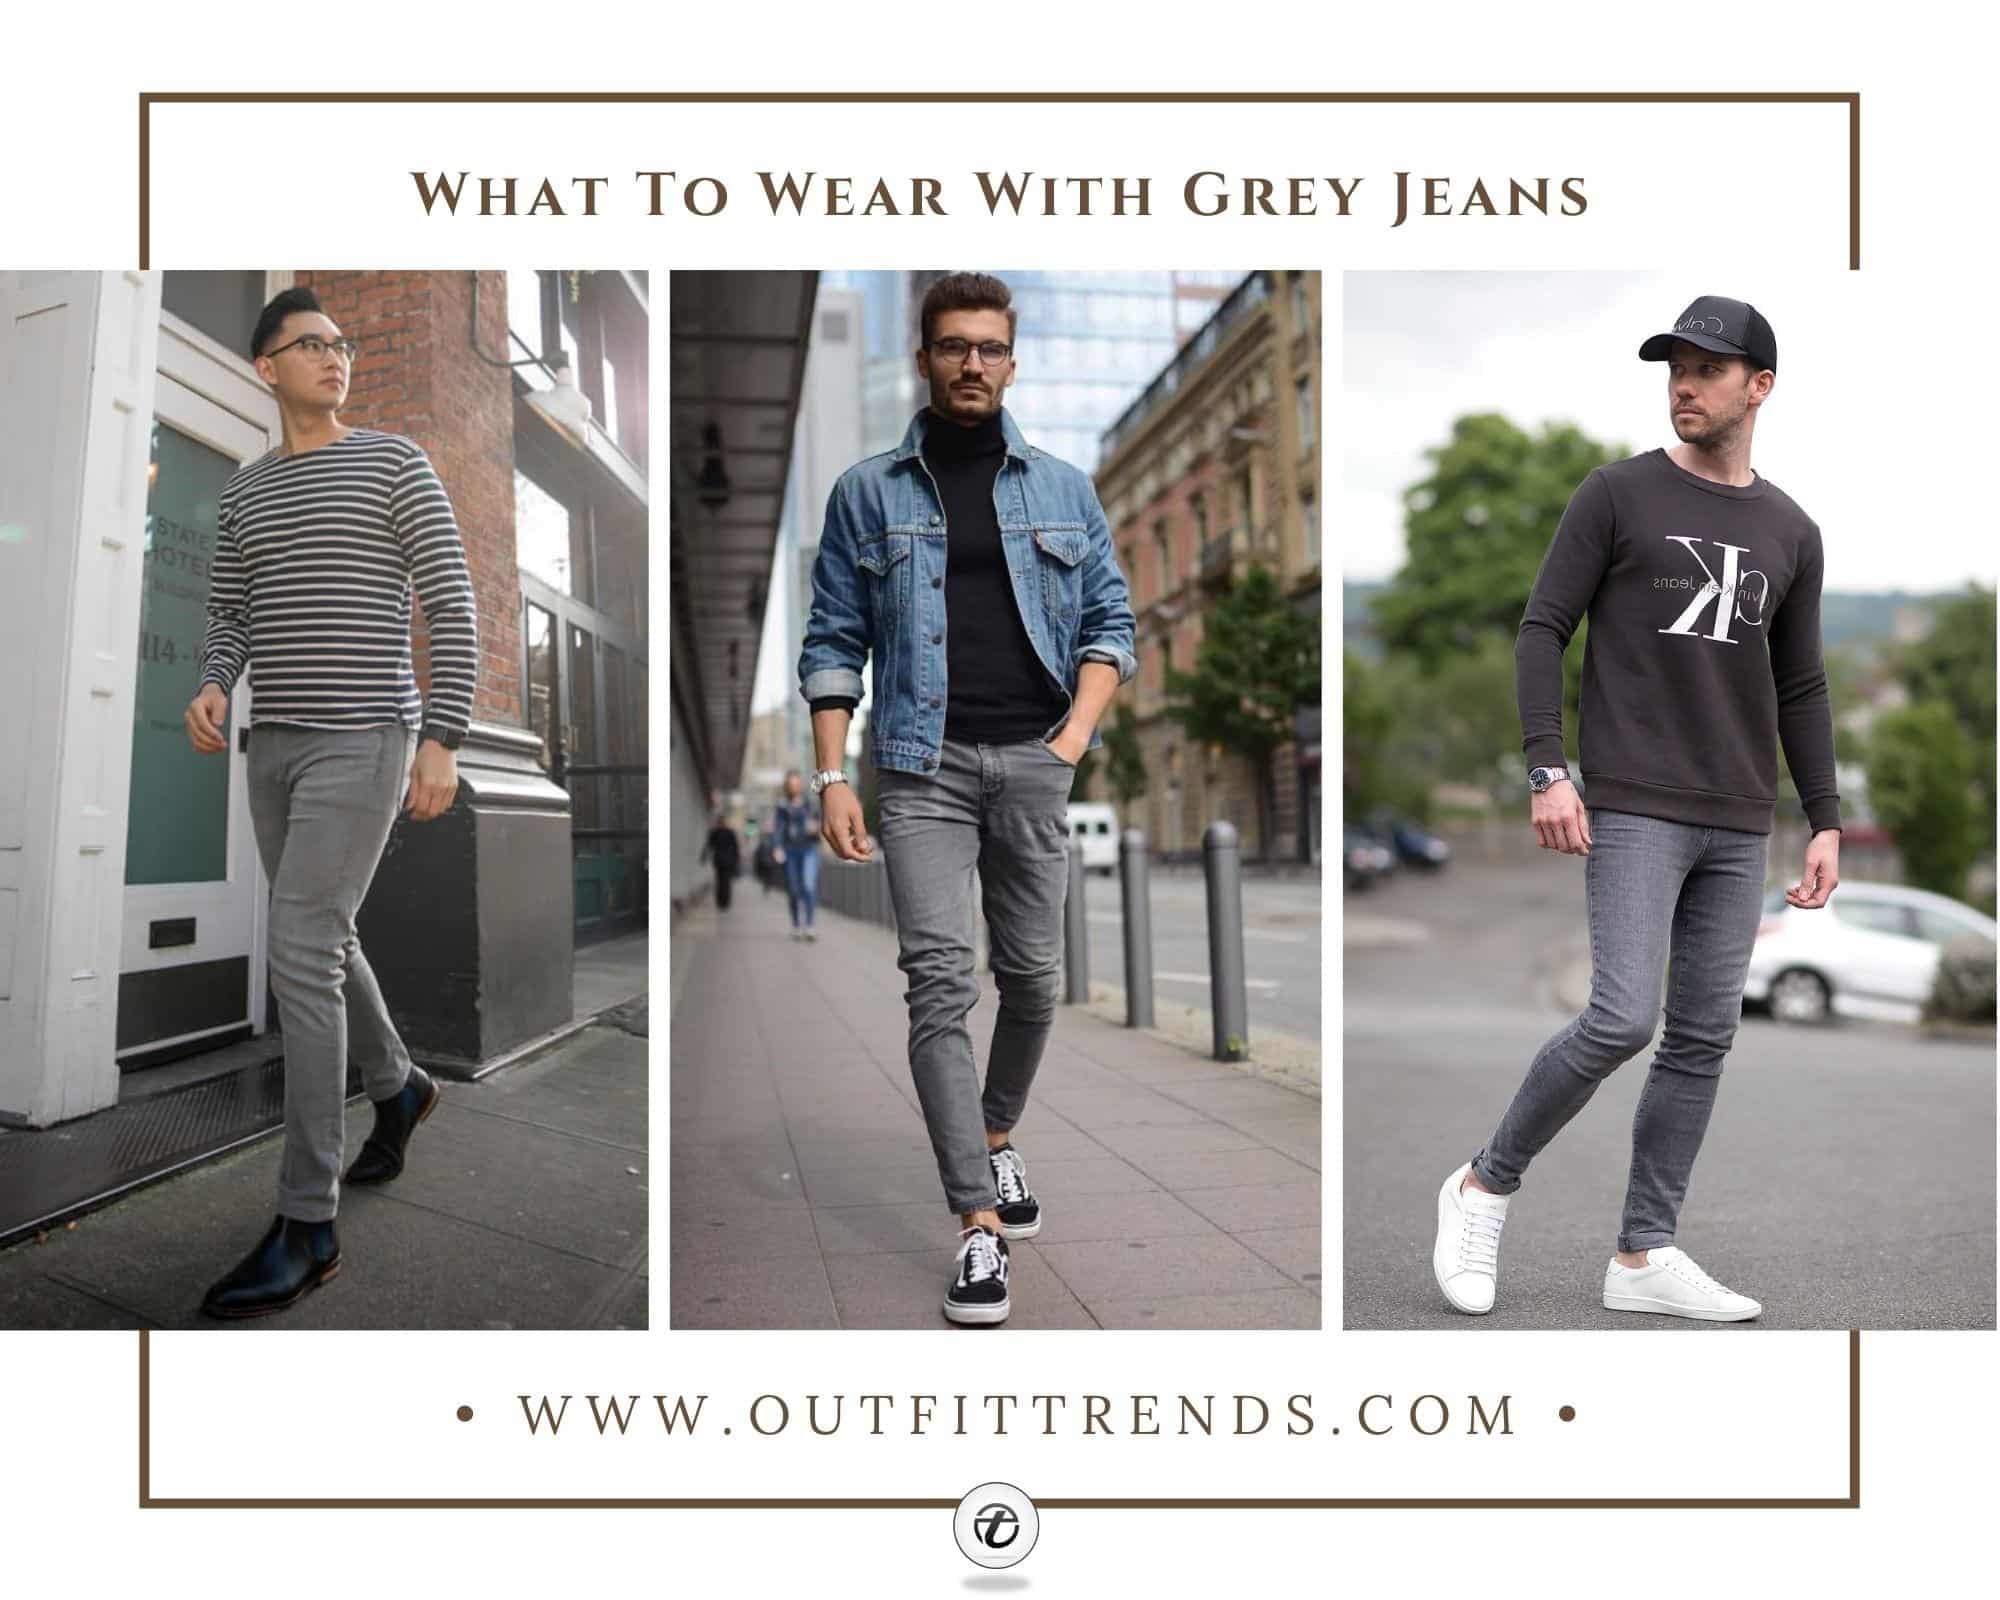 How To Wear Grey Jeans – 20 Outfits With Grey Jeans for Men